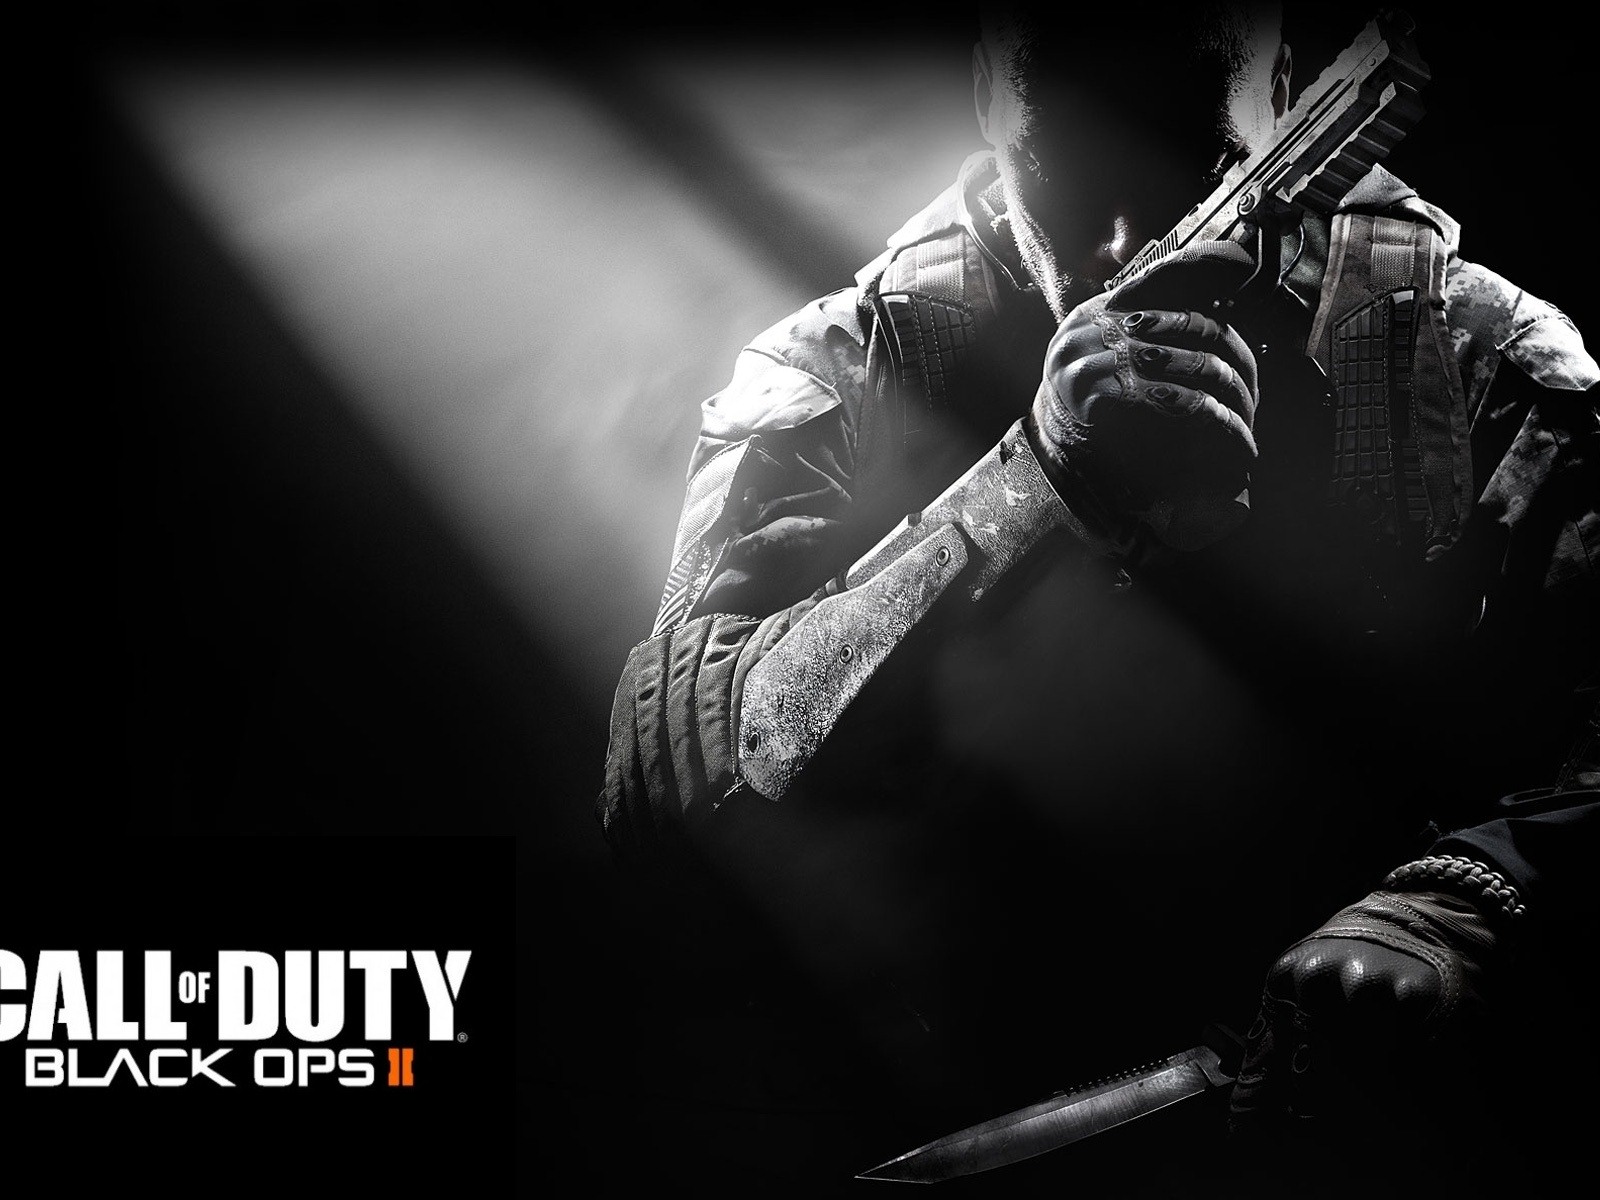 Call of Duty: Black Ops 2 HD wallpapers #11 - 1600x1200